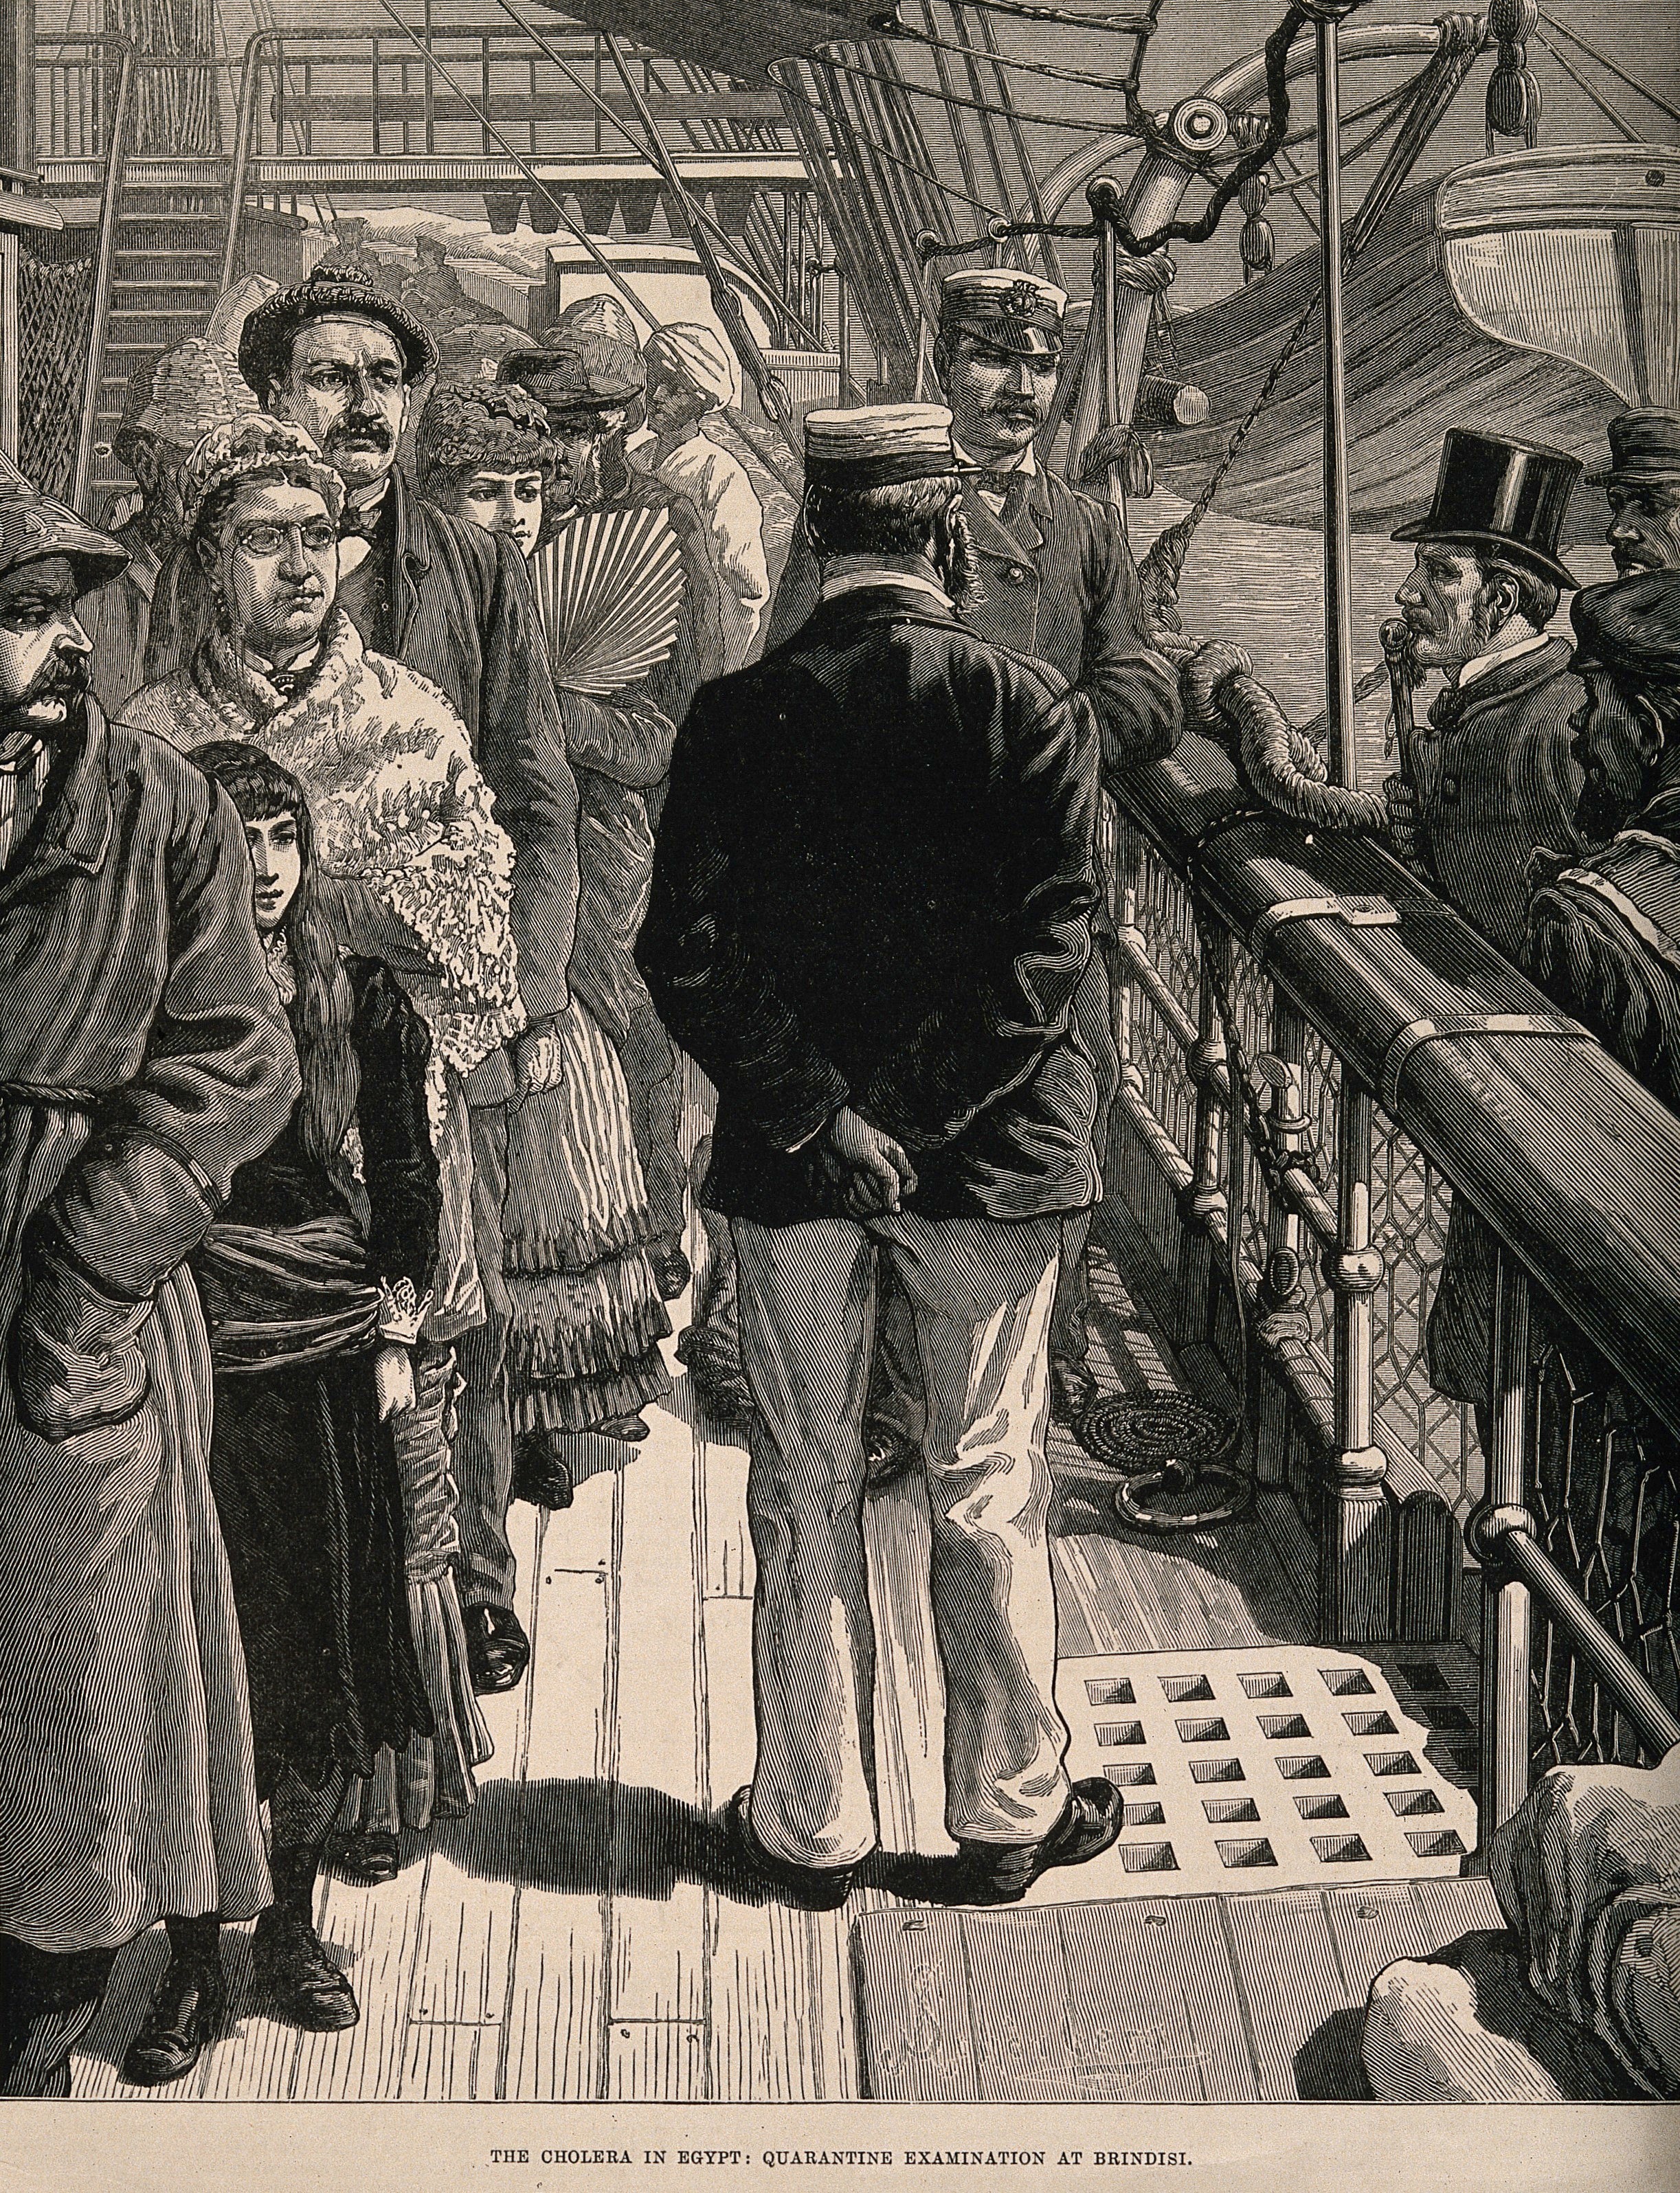 A wood engraving of passengers on a ship undergoing quarantine examination during the Egyptian cholera epidemic of 1883. Source: Wellcome Collection via CC BY 4.0.